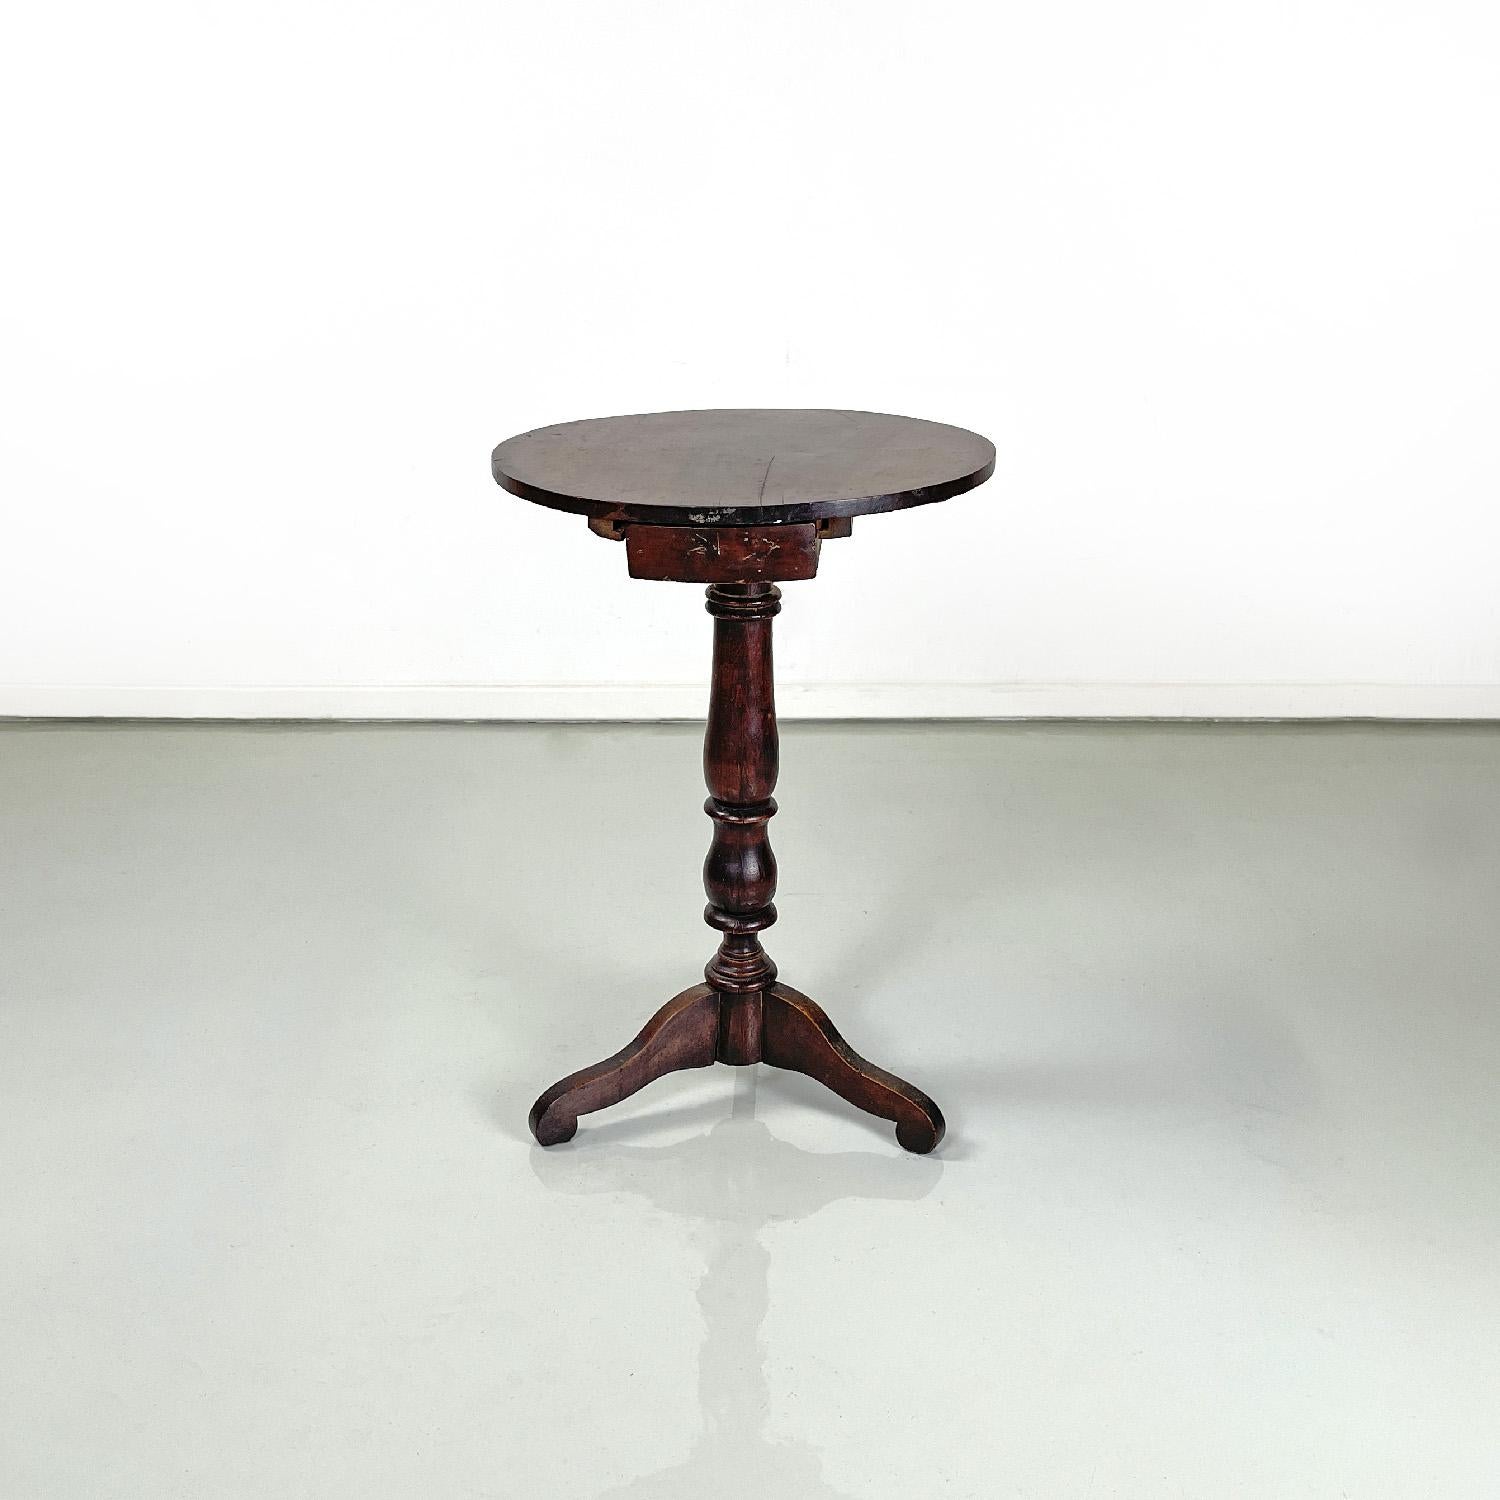 Italian antique wooden coffee table with two drawers, late 1800s
Round coffee table made entirely of wood. It has a round top with two drawers on the diameter immediately below, the front part of which follows the curve of the top. The central stem